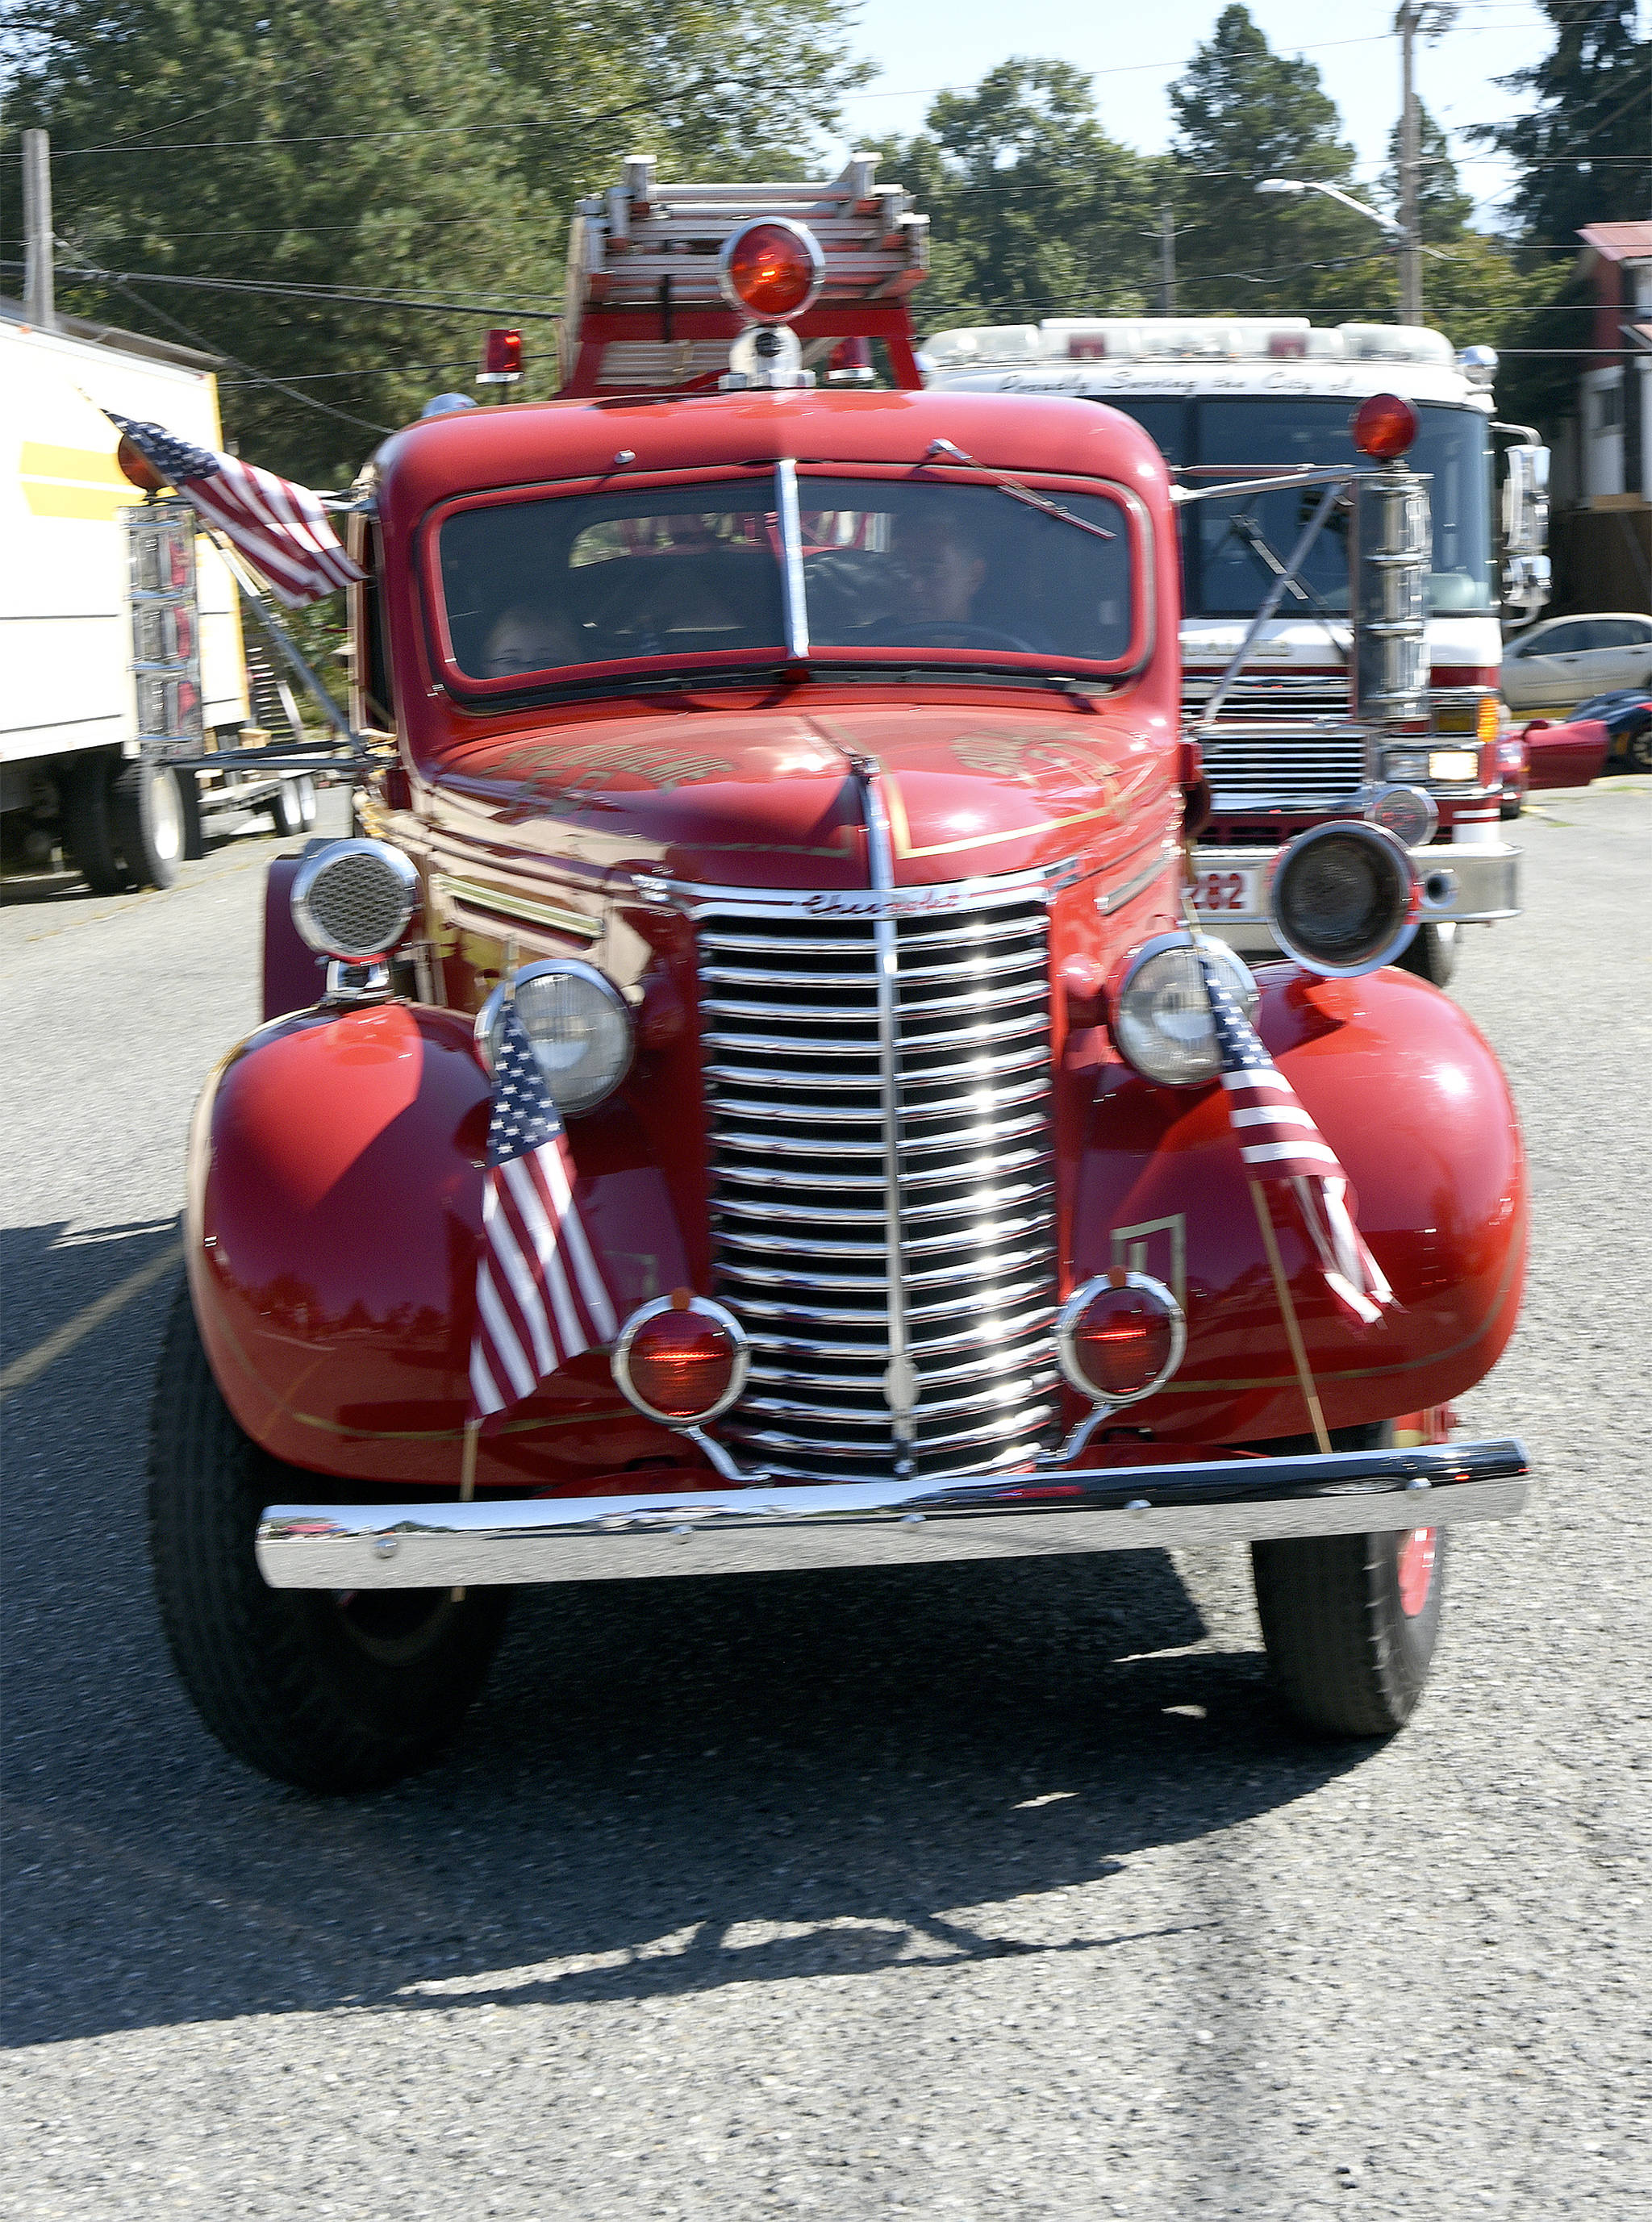 The Snoqualmie Fire Department’s historic engine is a regular feature in the Railroad Days parade. File Photo